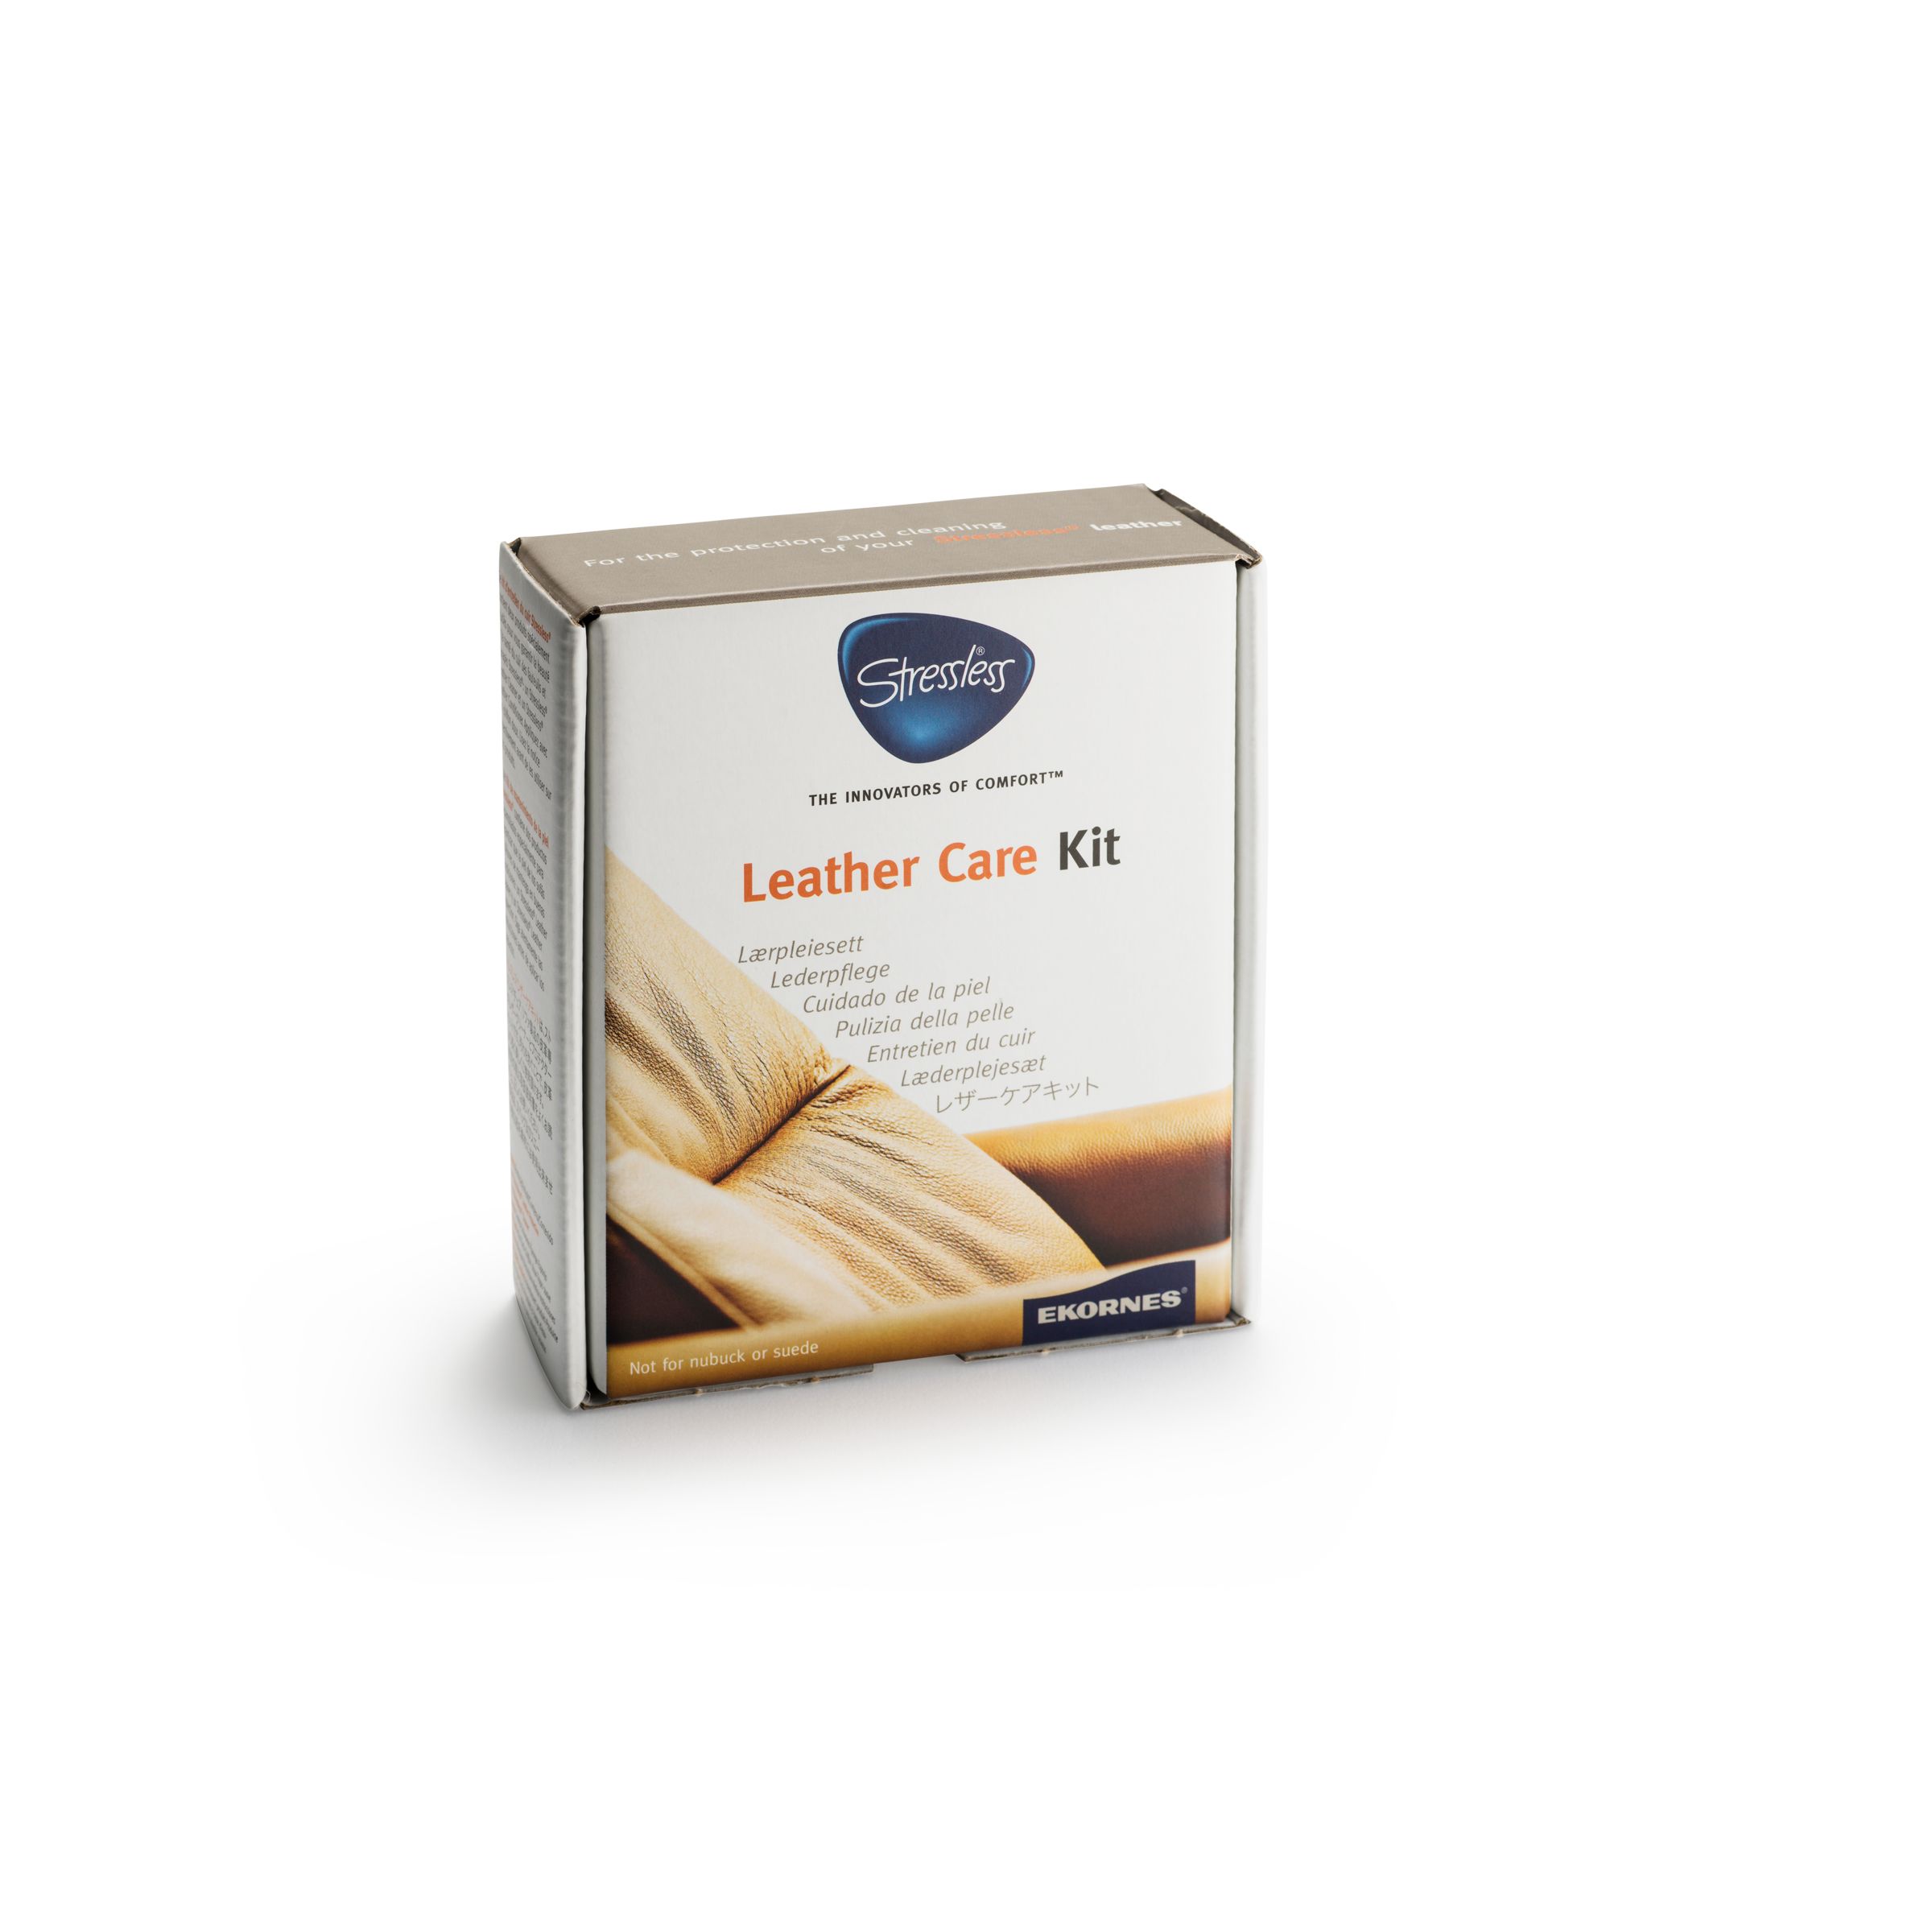 Stressless Leather Care Wipe Kit - The Century House - Madison, WI